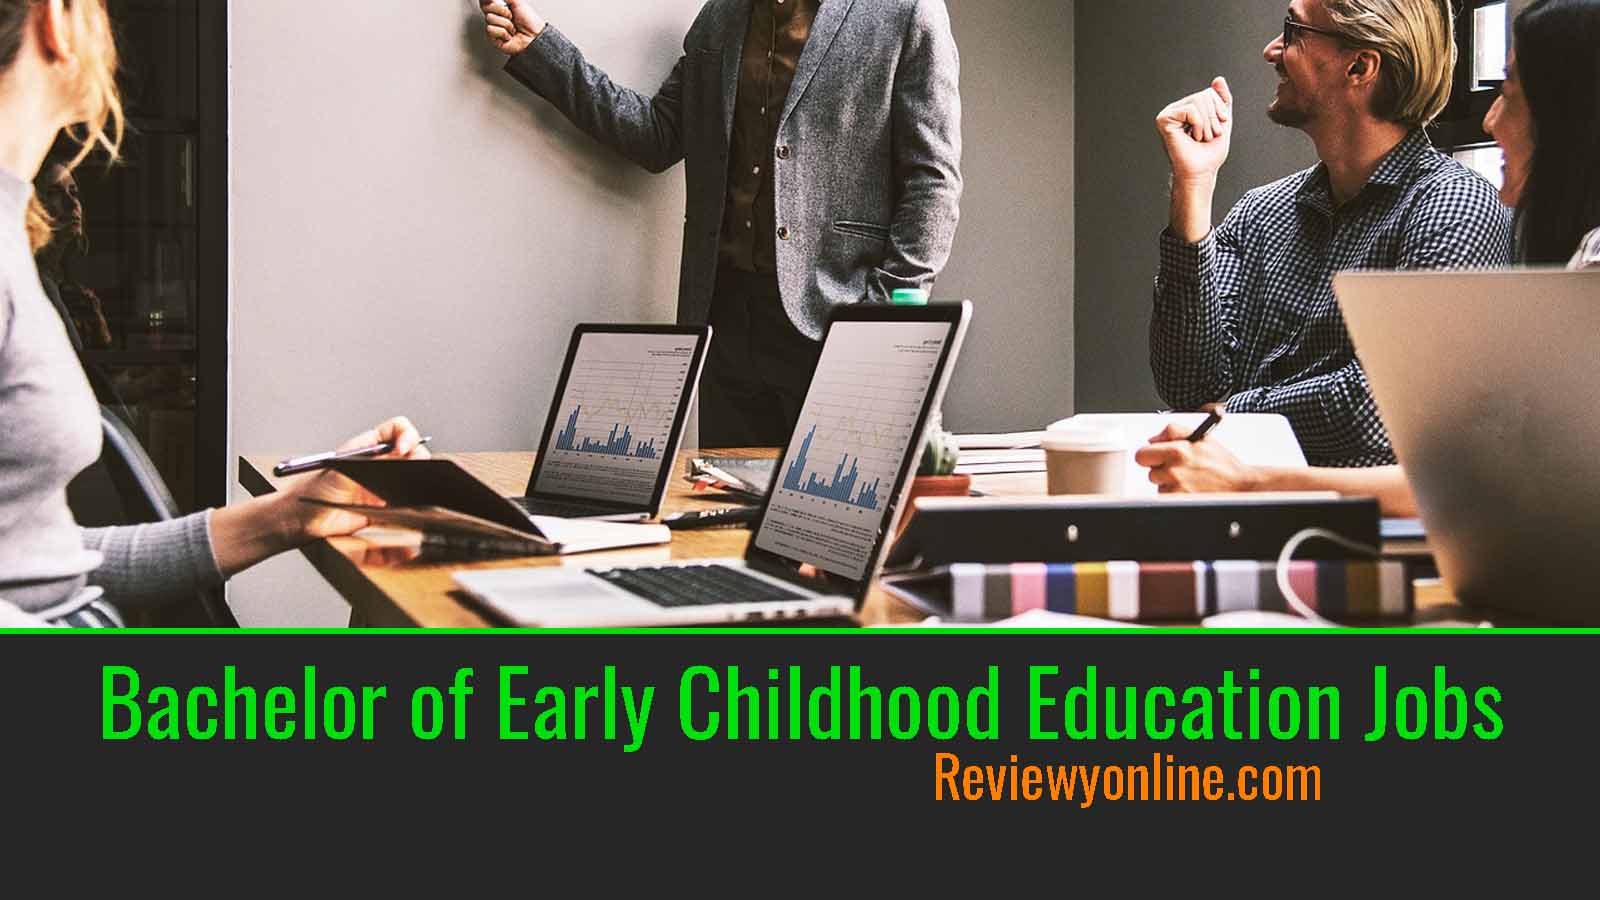 Bachelor of Early Childhood Education Jobs Reviewyonline.com